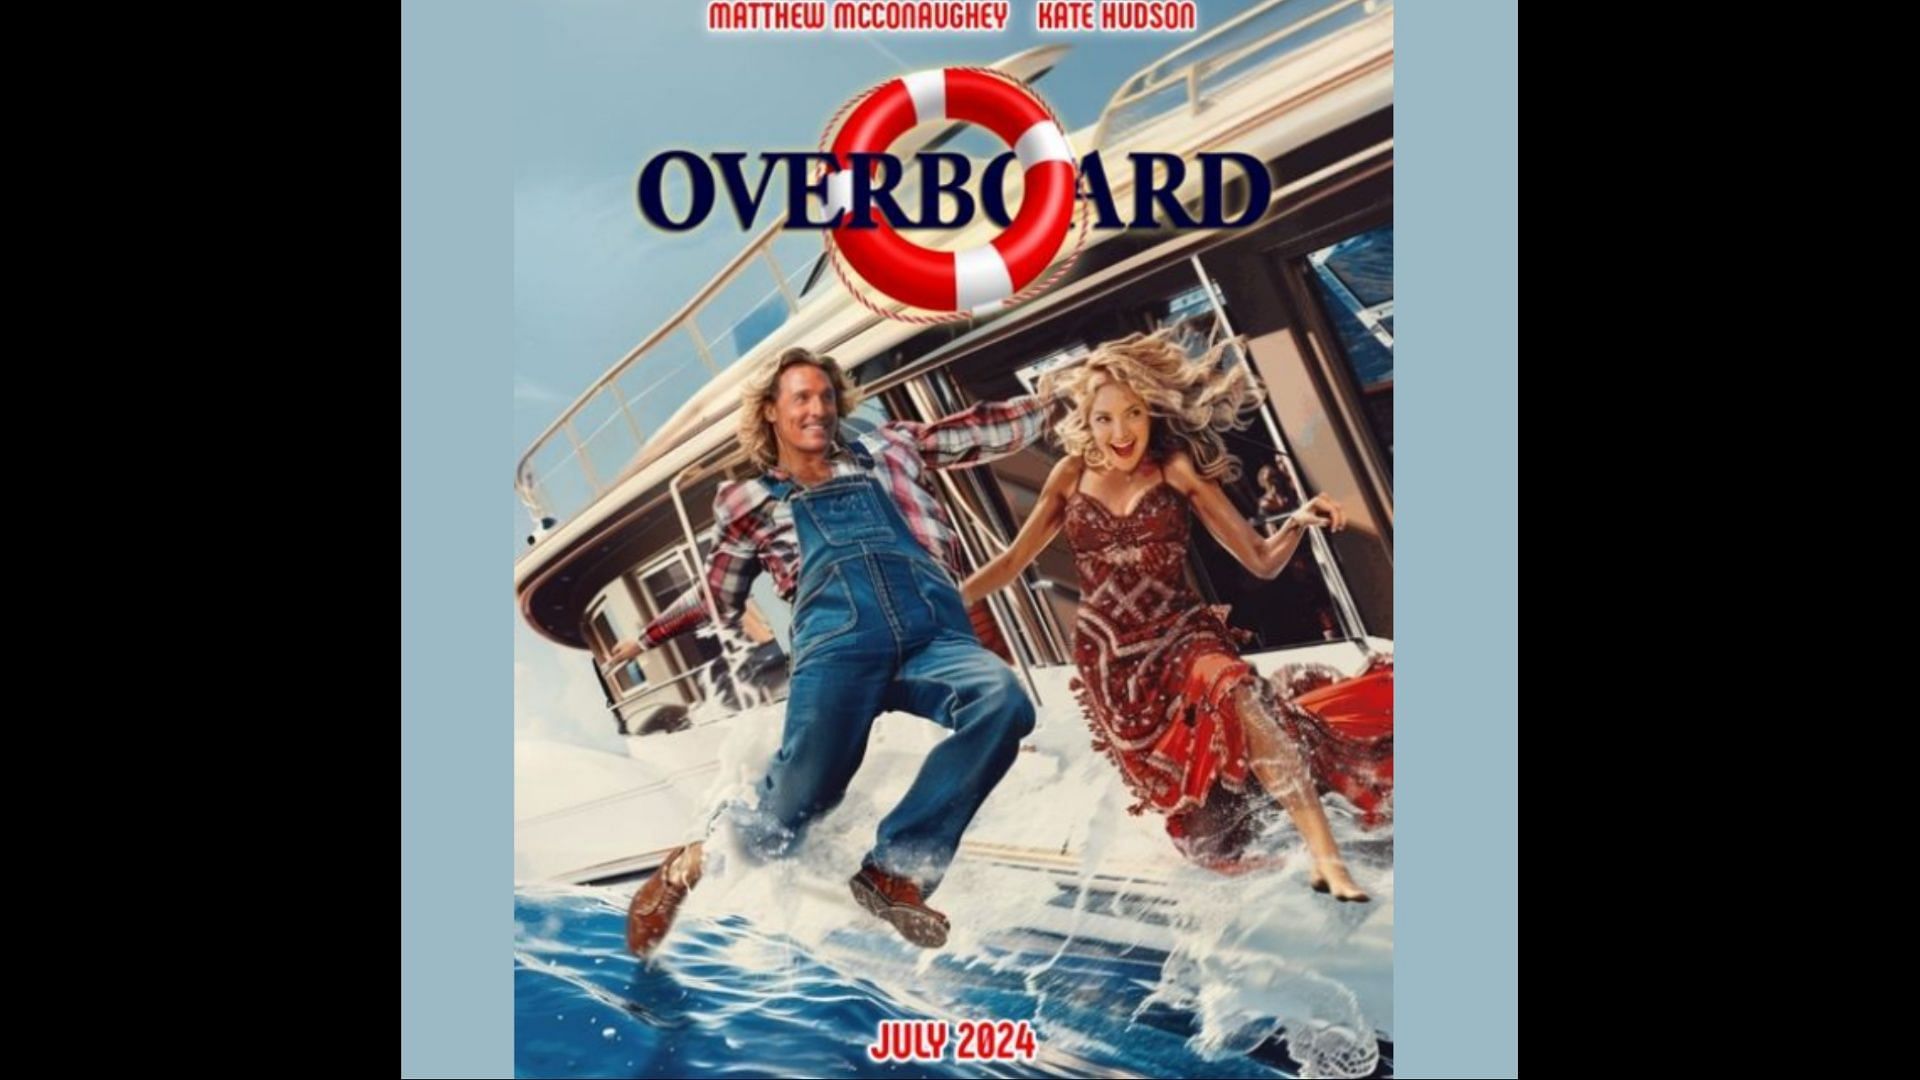 Claims of a new rendition of Overboard starring Matthew McConaughey and Kate Hudson debunked (Image via YODA BBY ABY/Facebook)